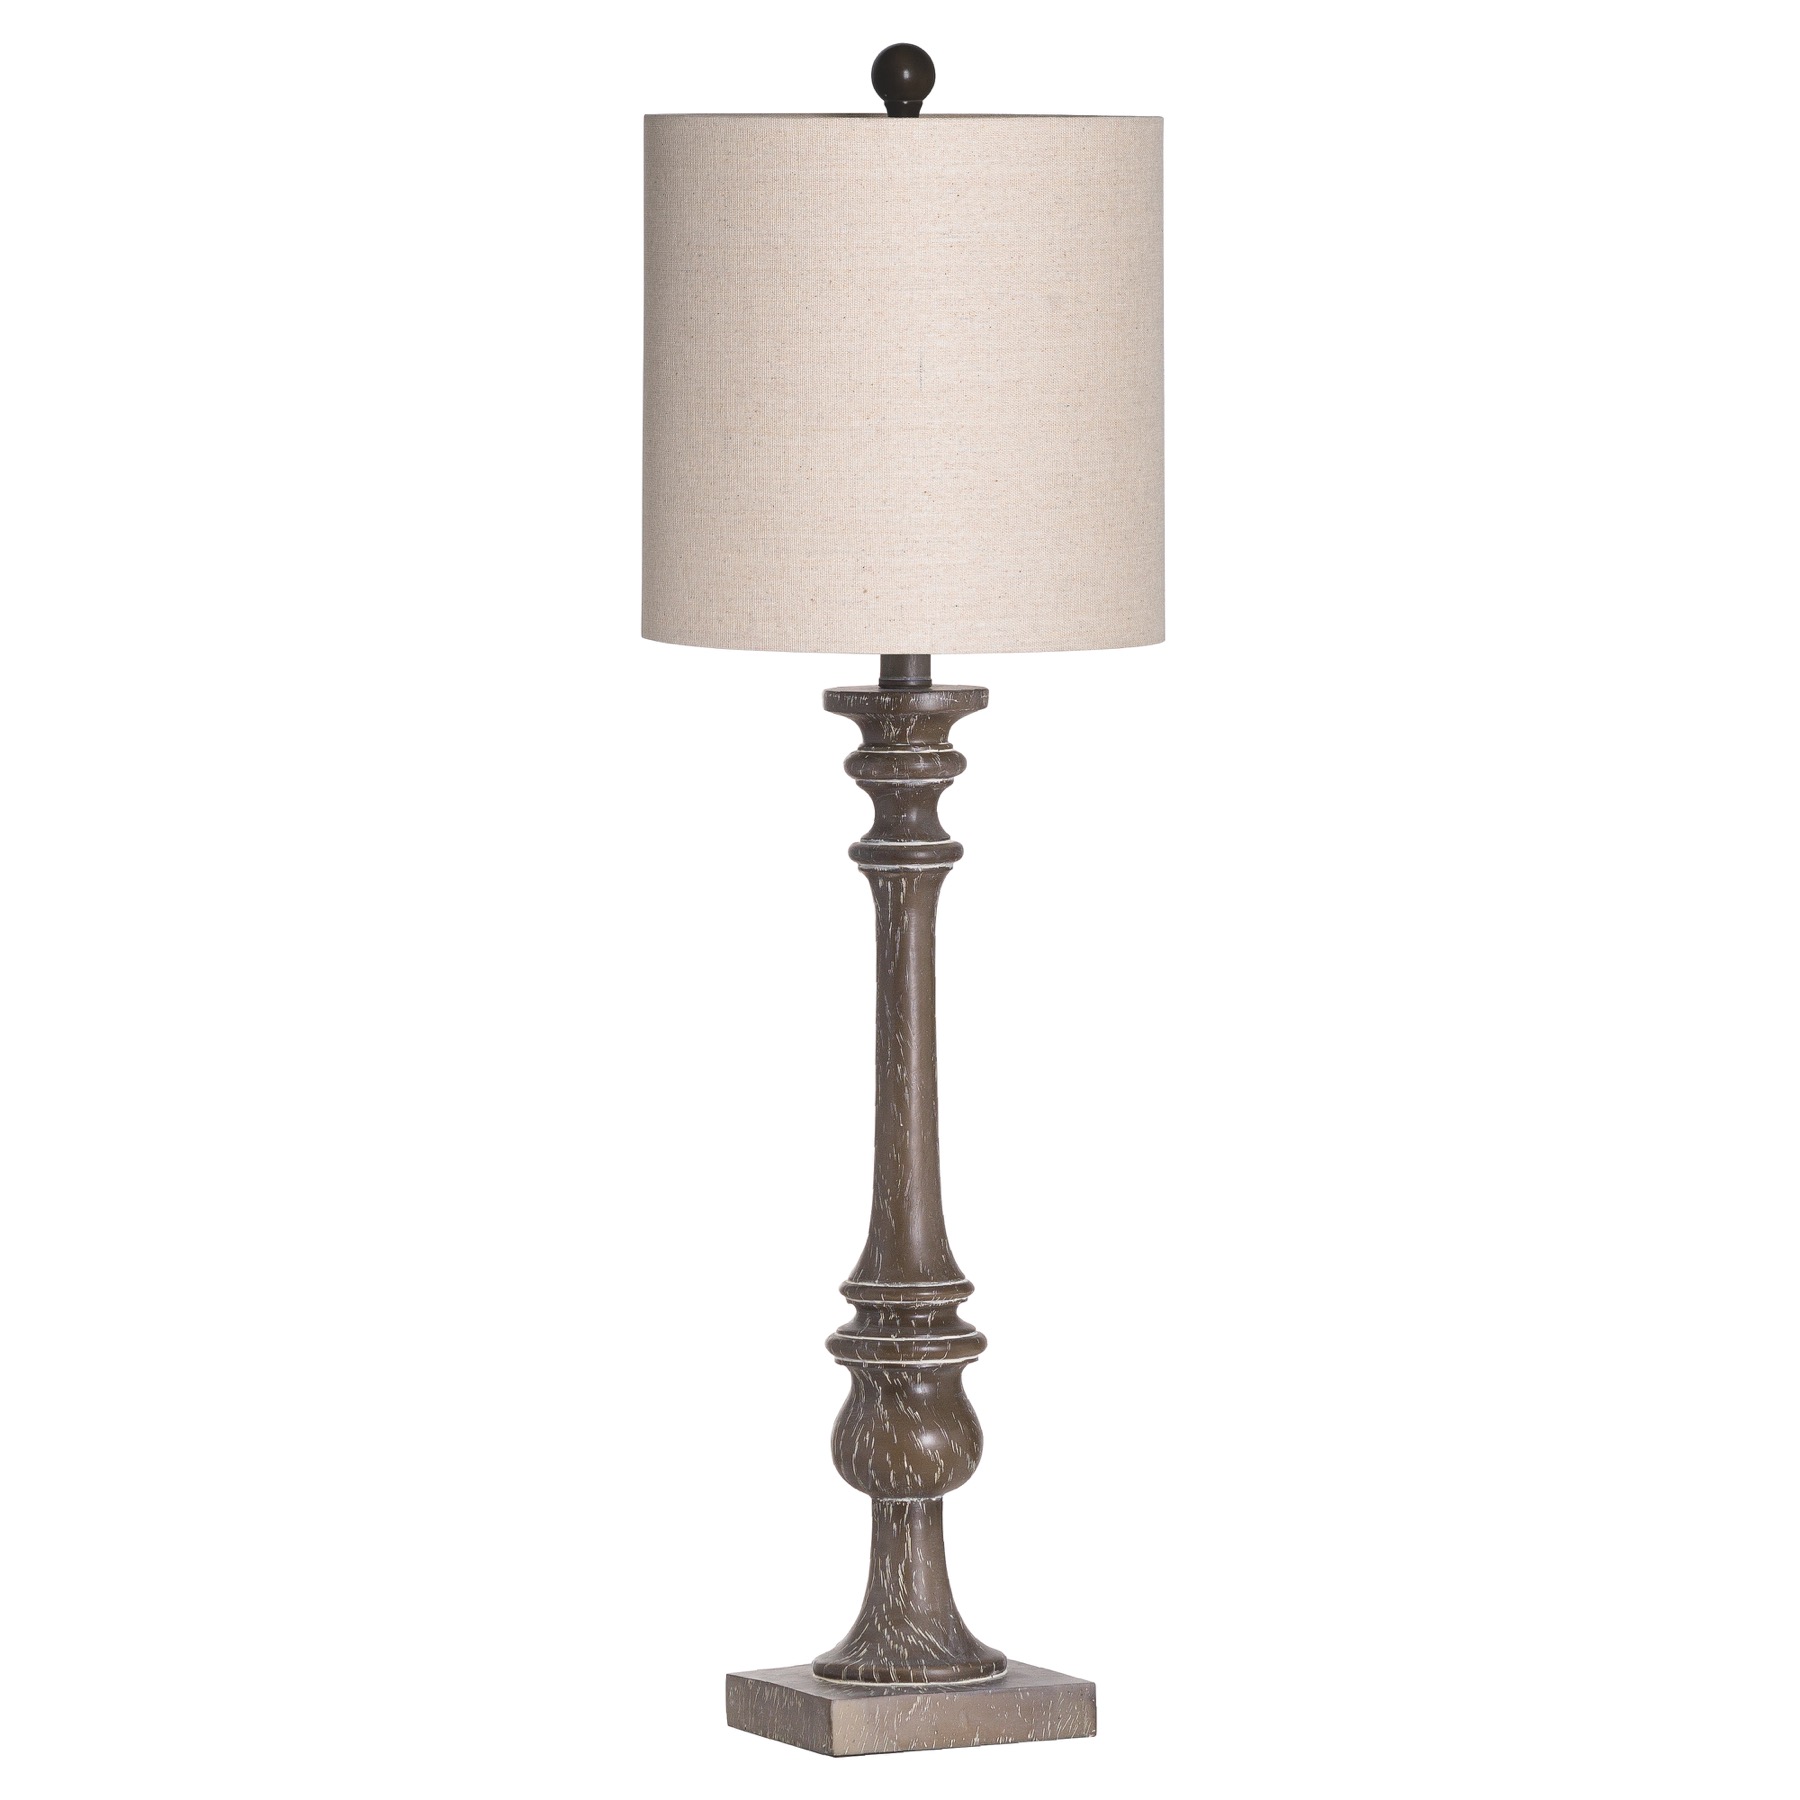 Ursa Table Lamp With Linen Shade - Image 1